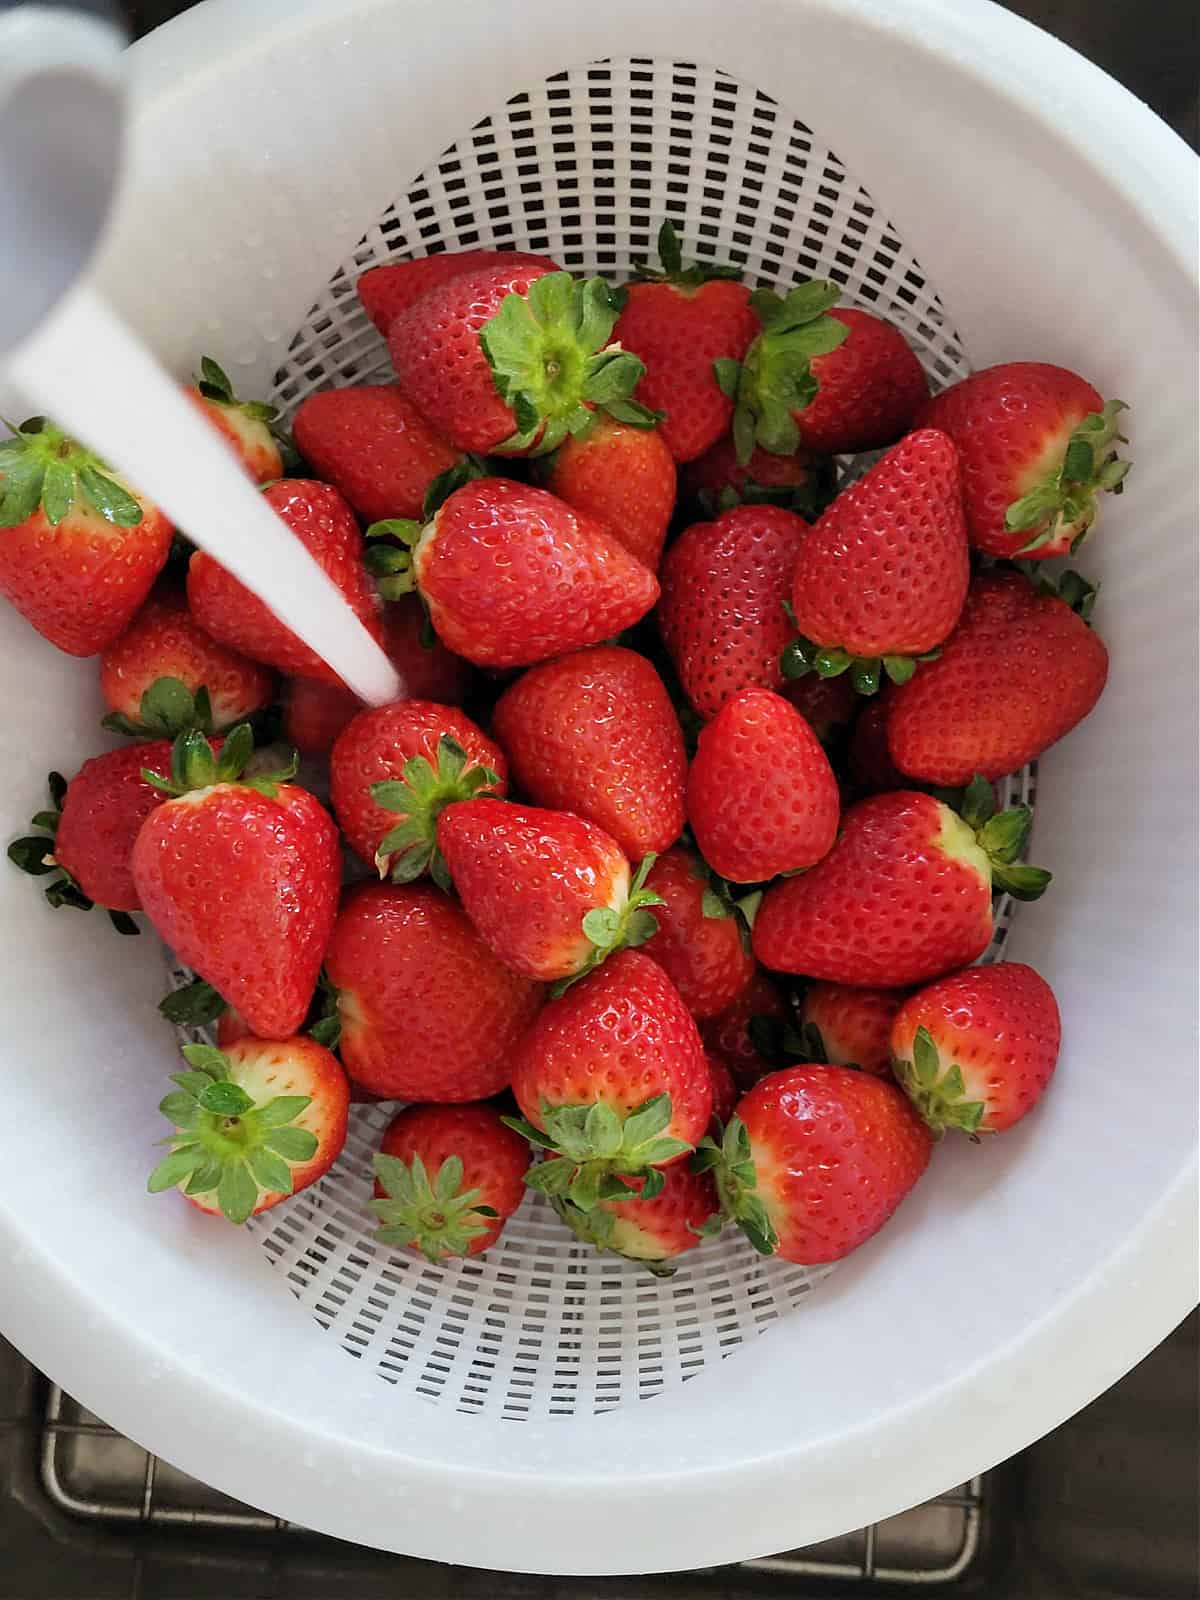  Strawberries for fruit tray 